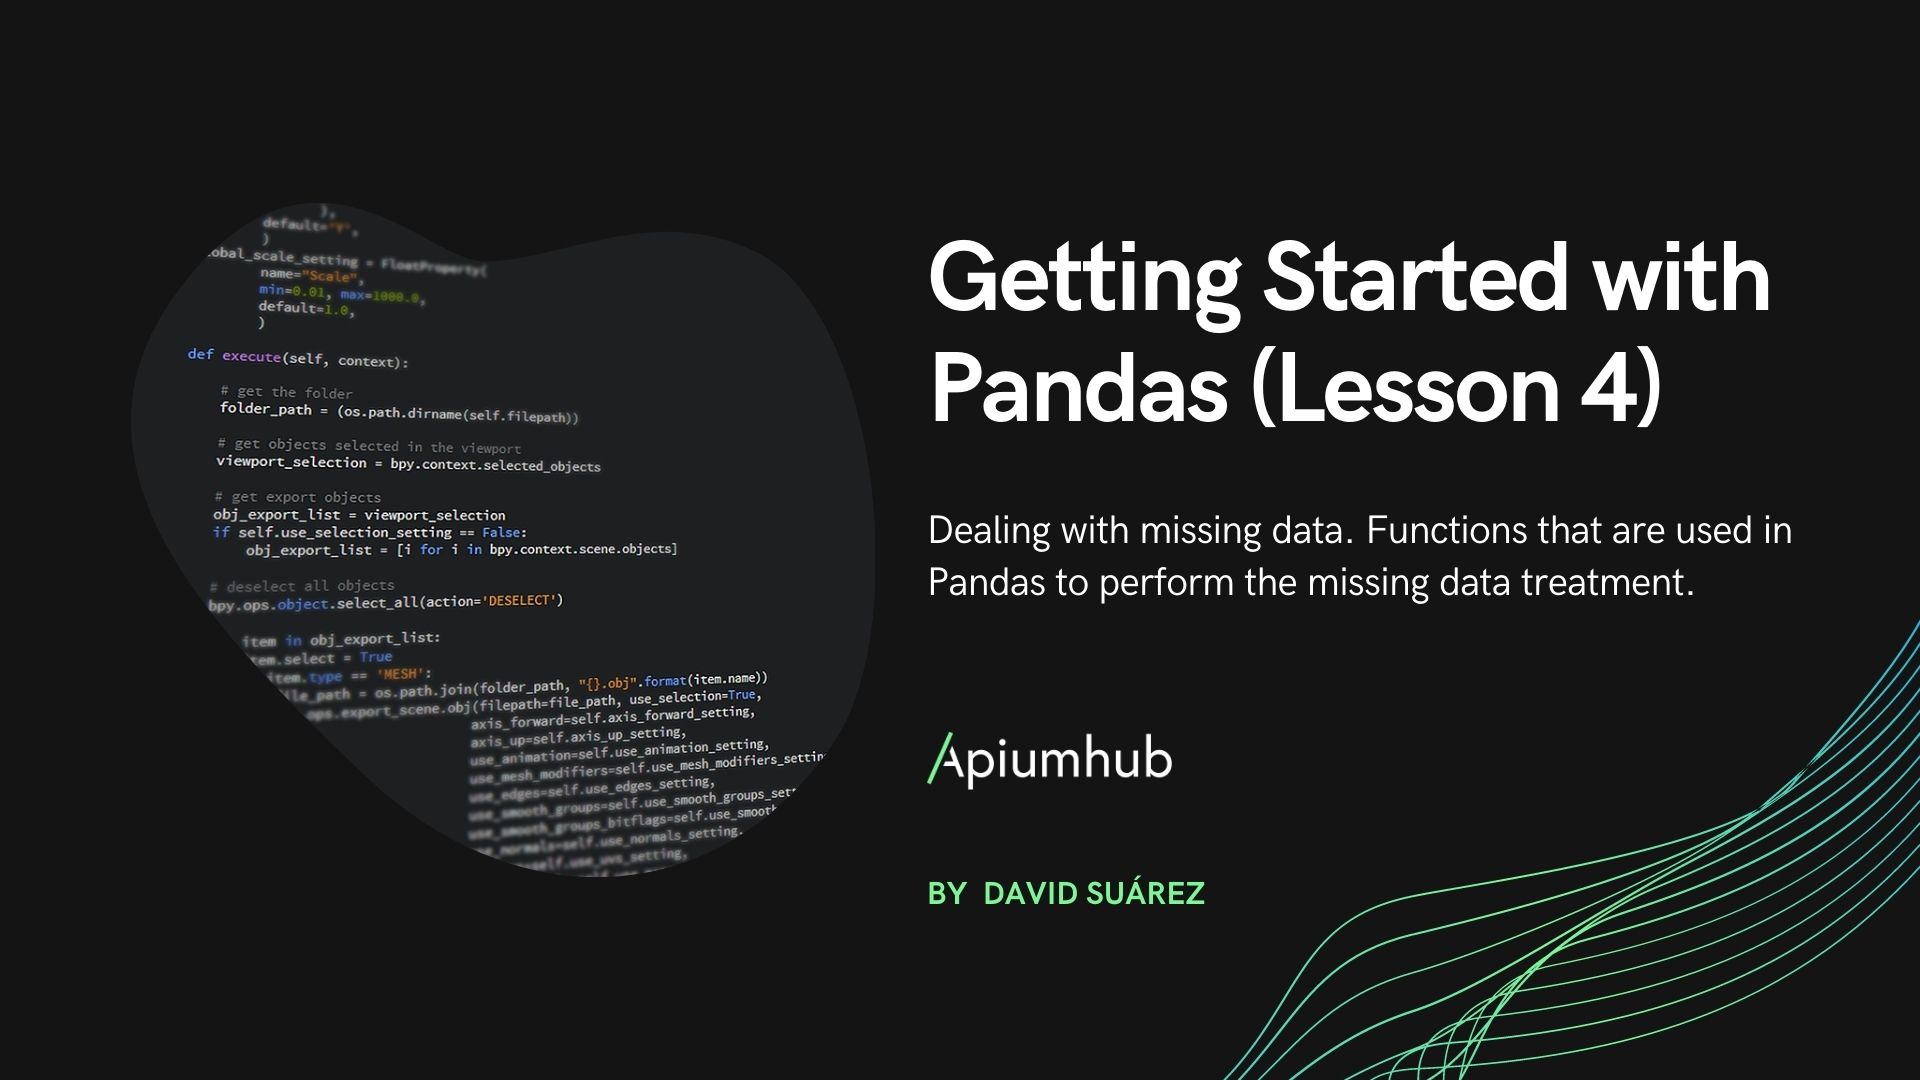 Getting Started with Pandas – Lesson 4